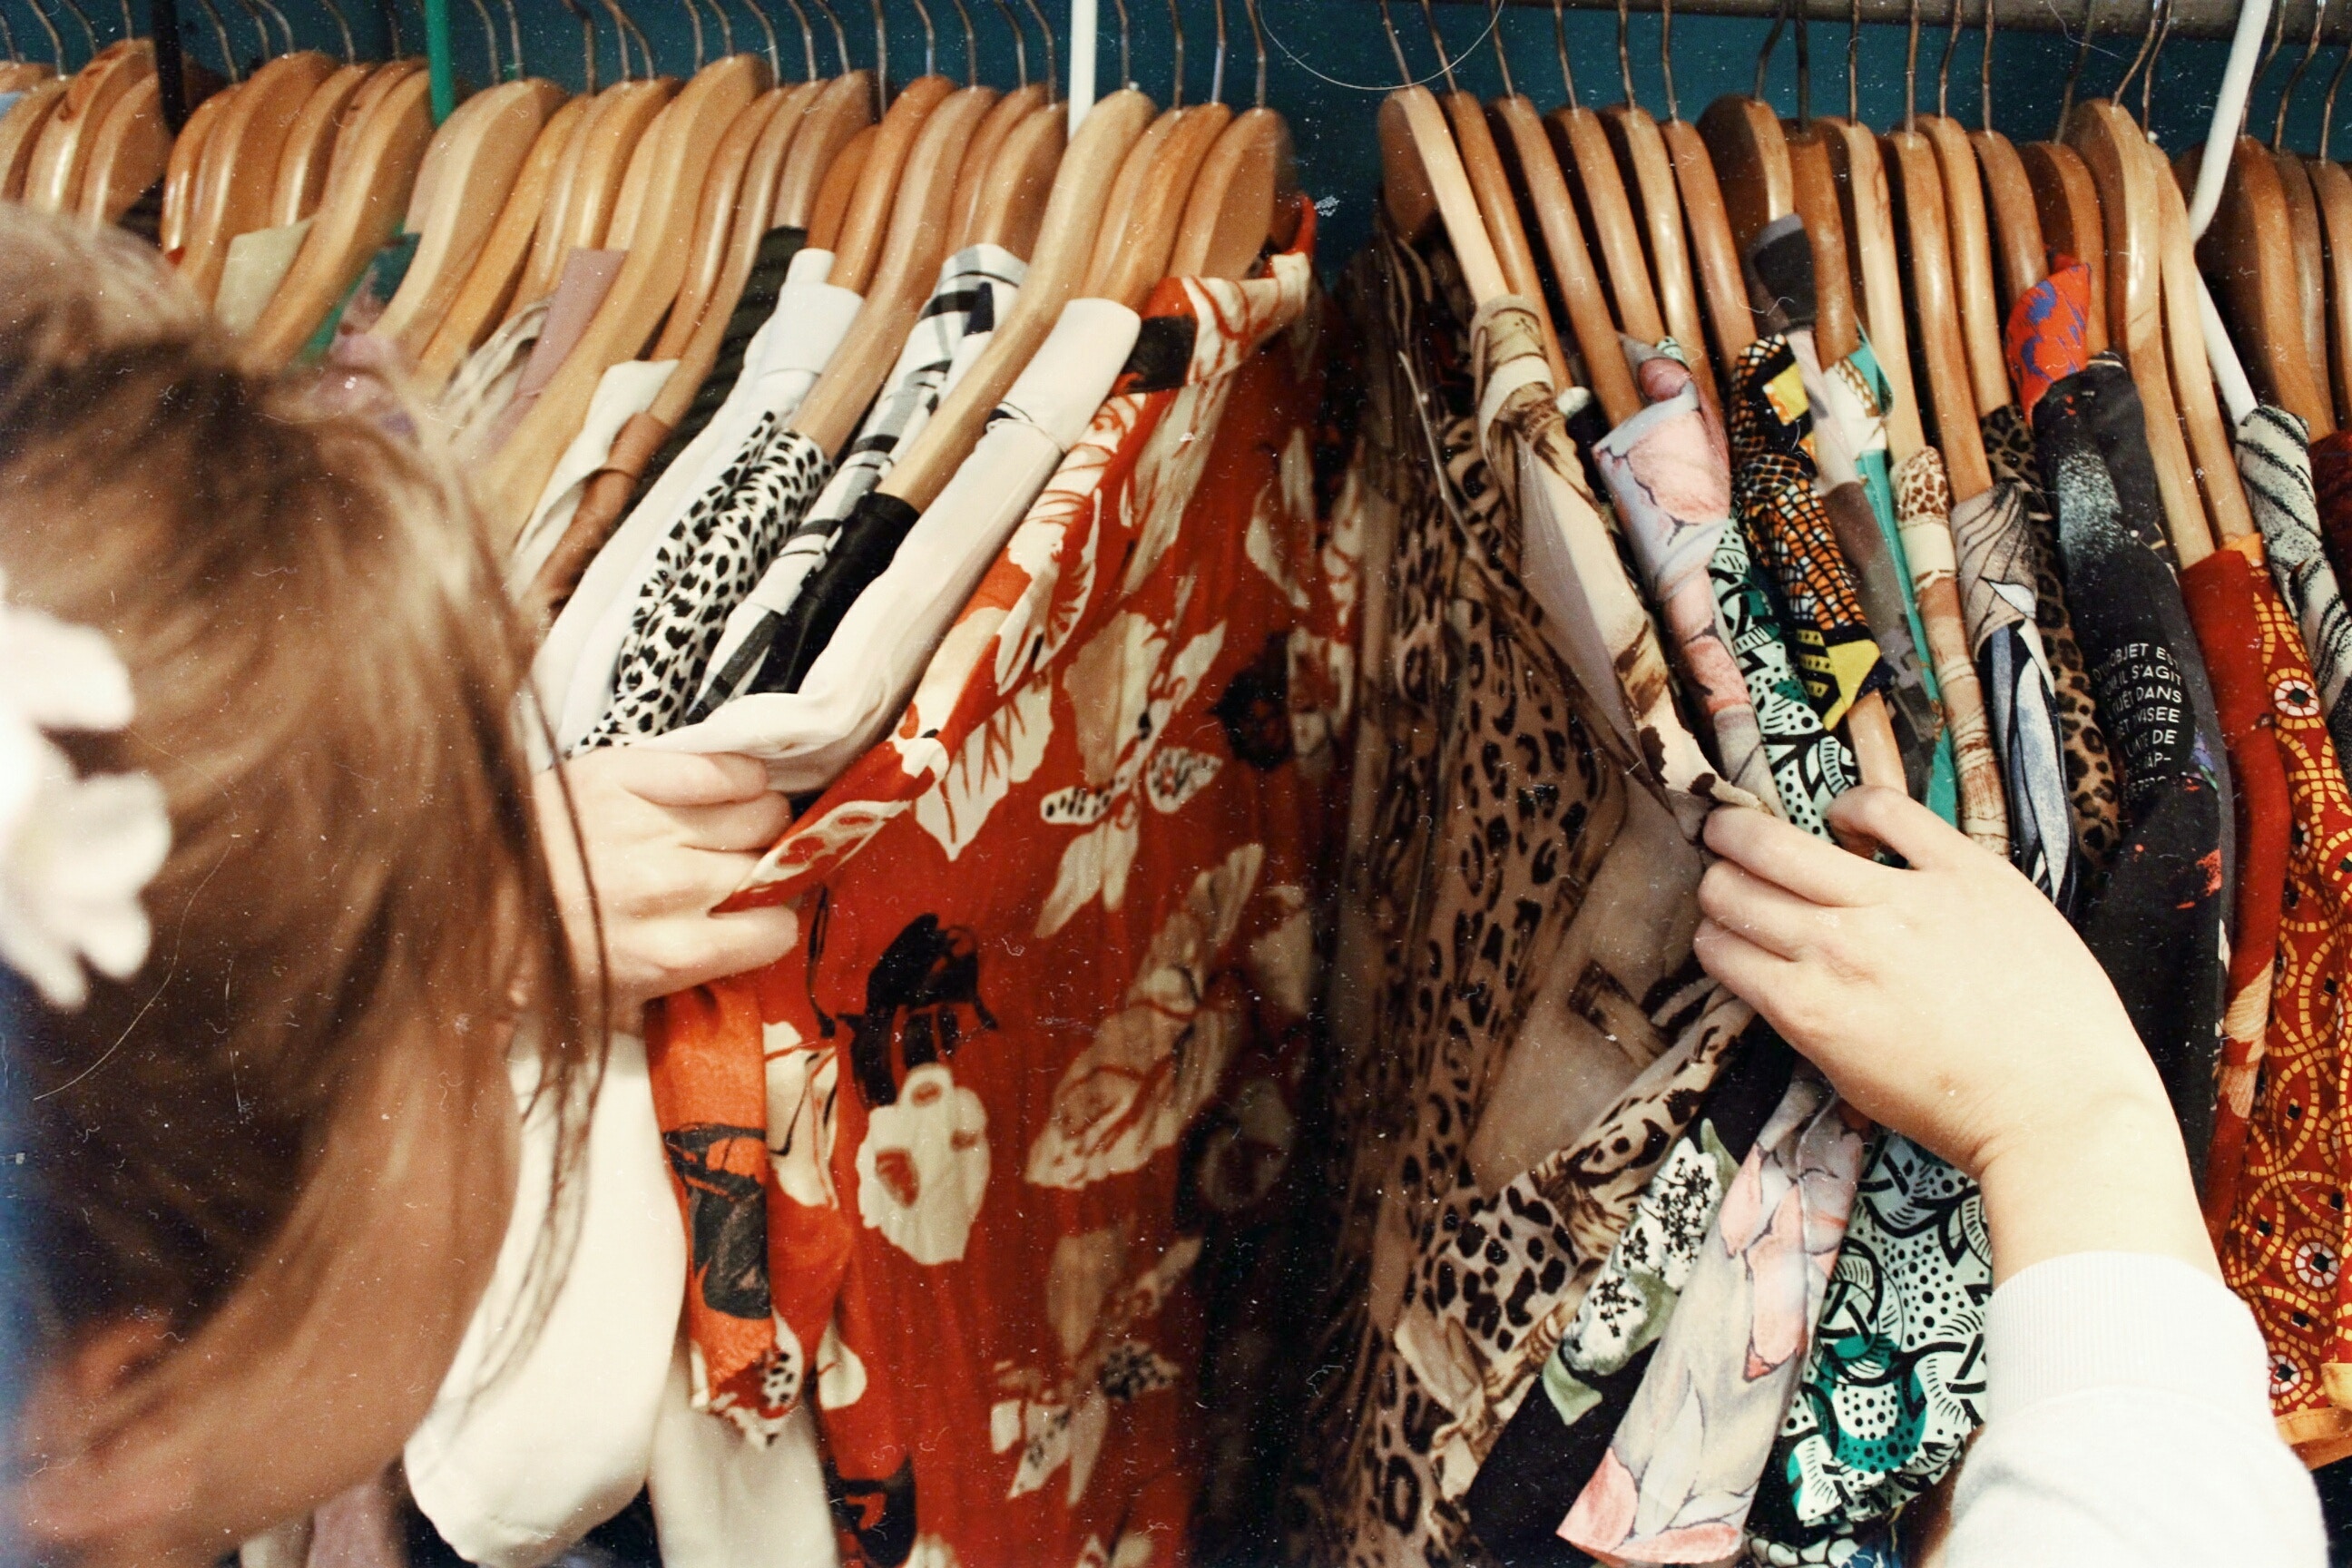 A woman looks through a rack of dresses